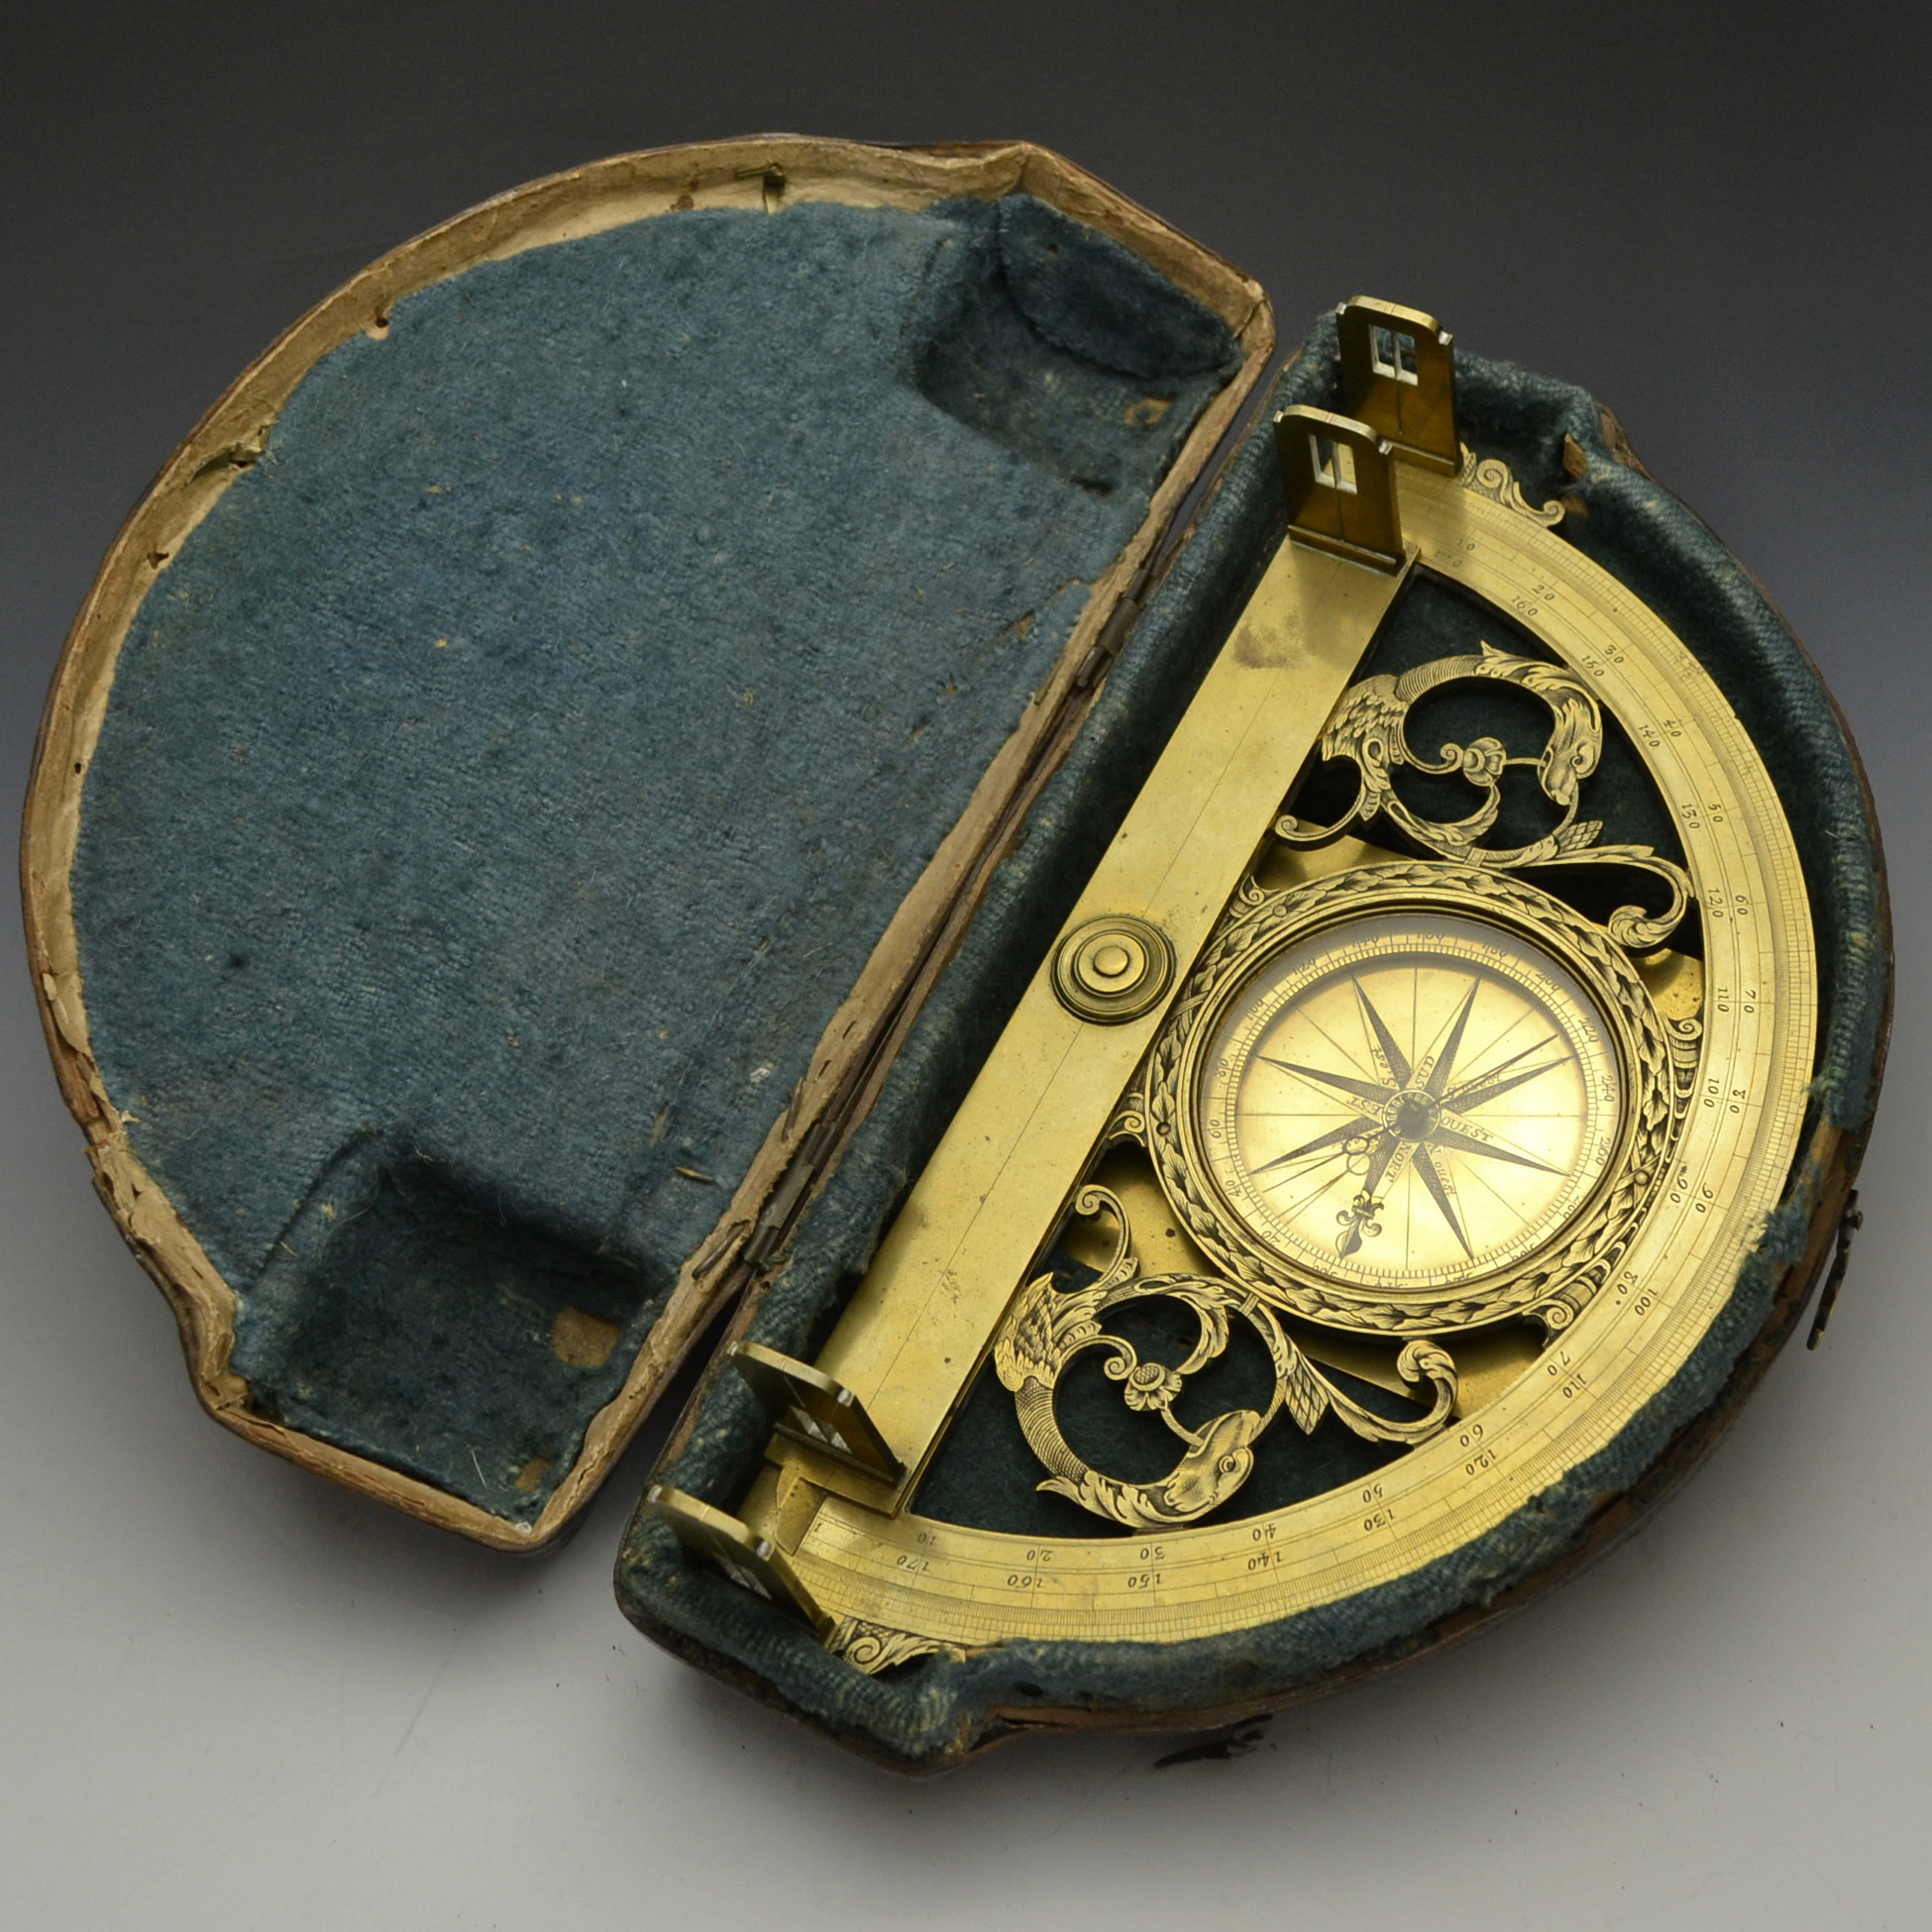 A museum quality 17th century cased Graphometer decorated with gargoyles